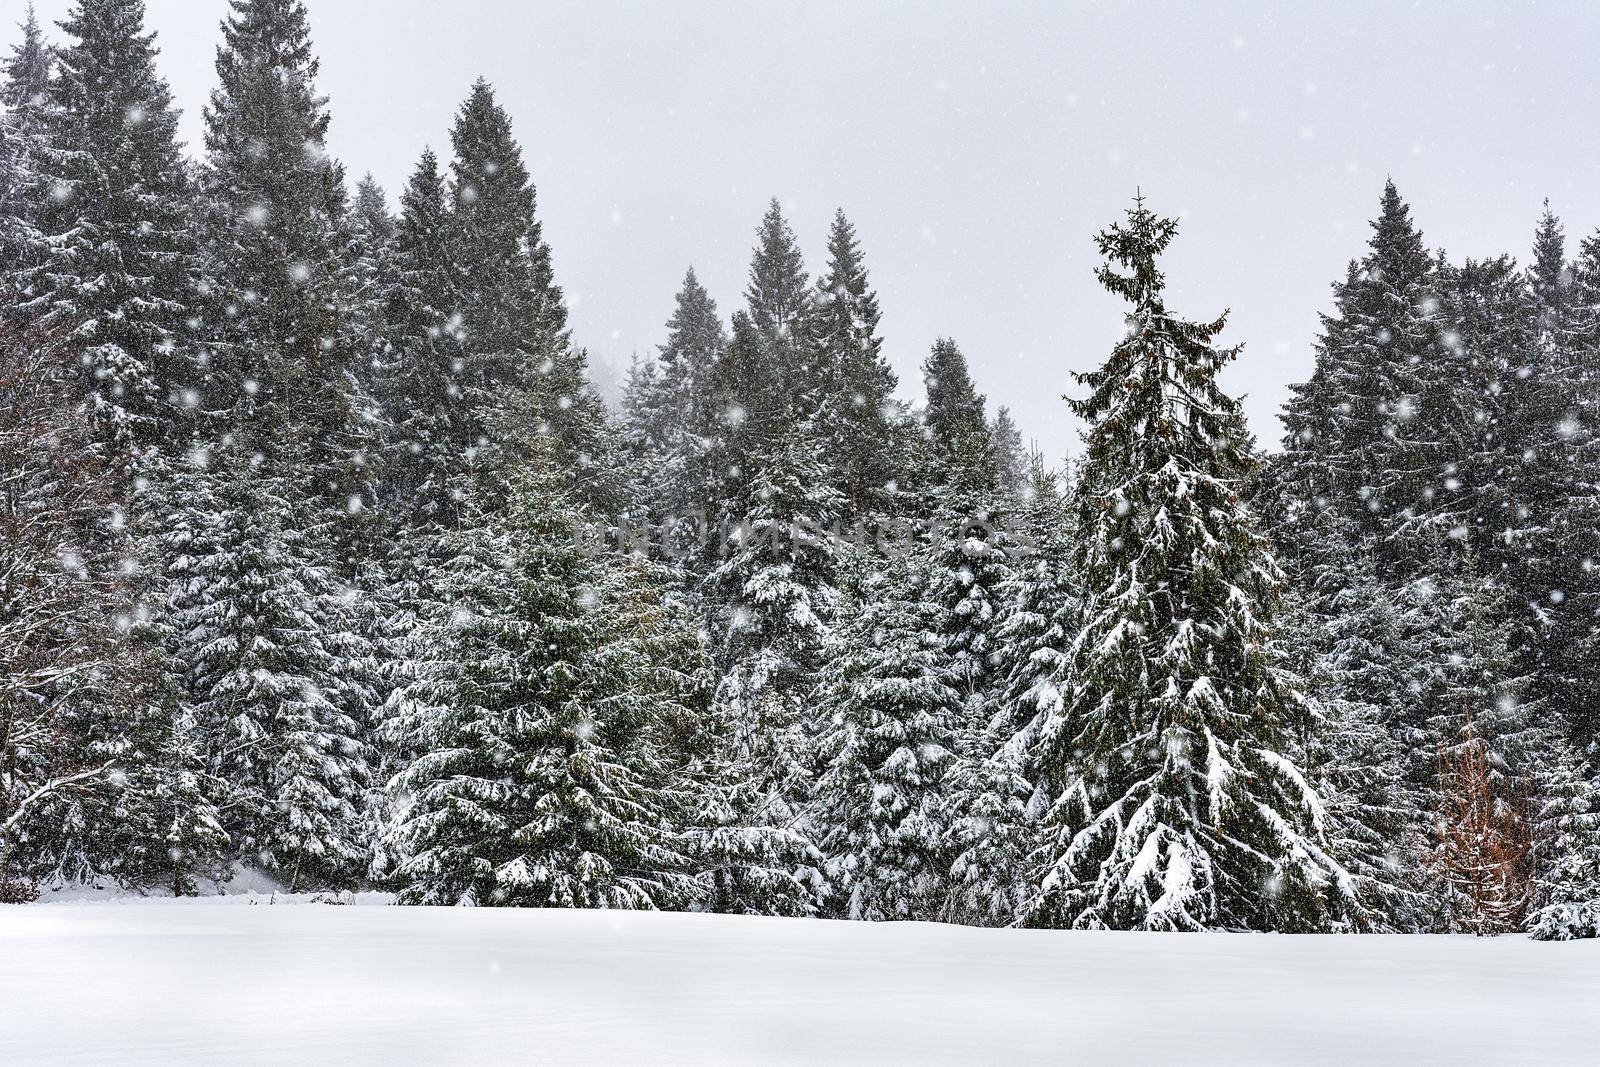 Beautiful winter landscape - snowfall in a mountain forest